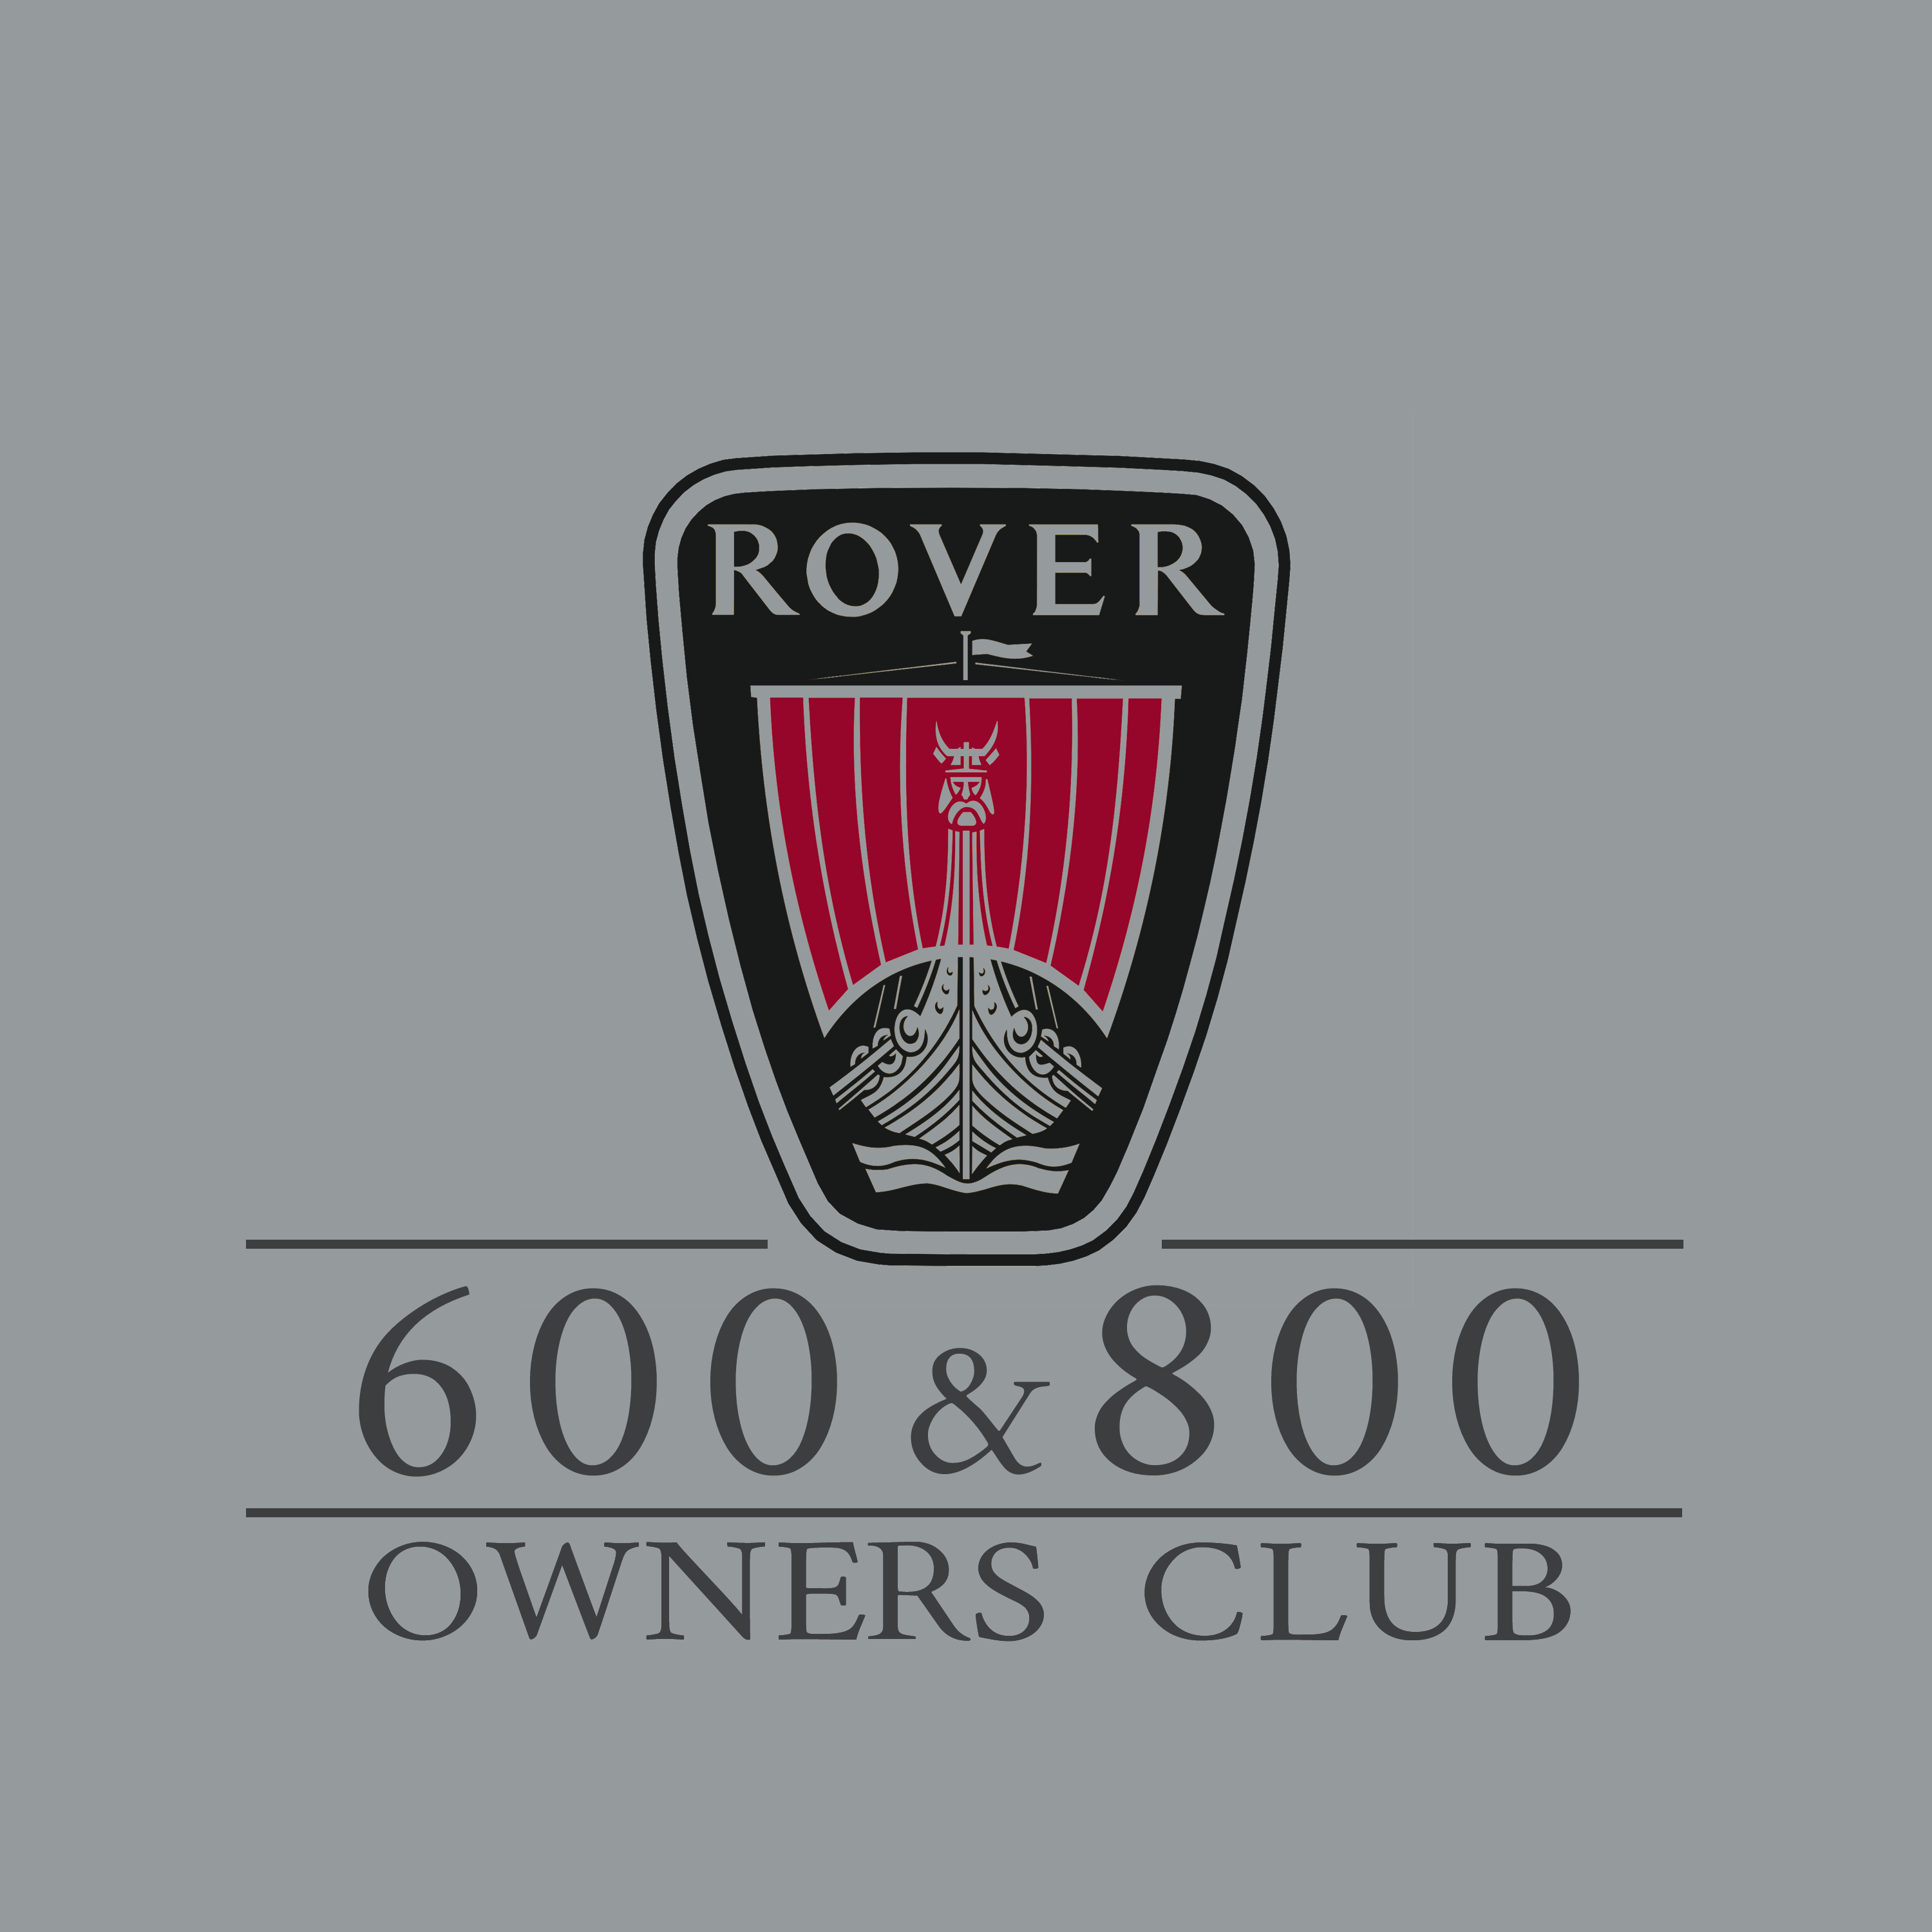 Rover 600 & 800 Owners Club